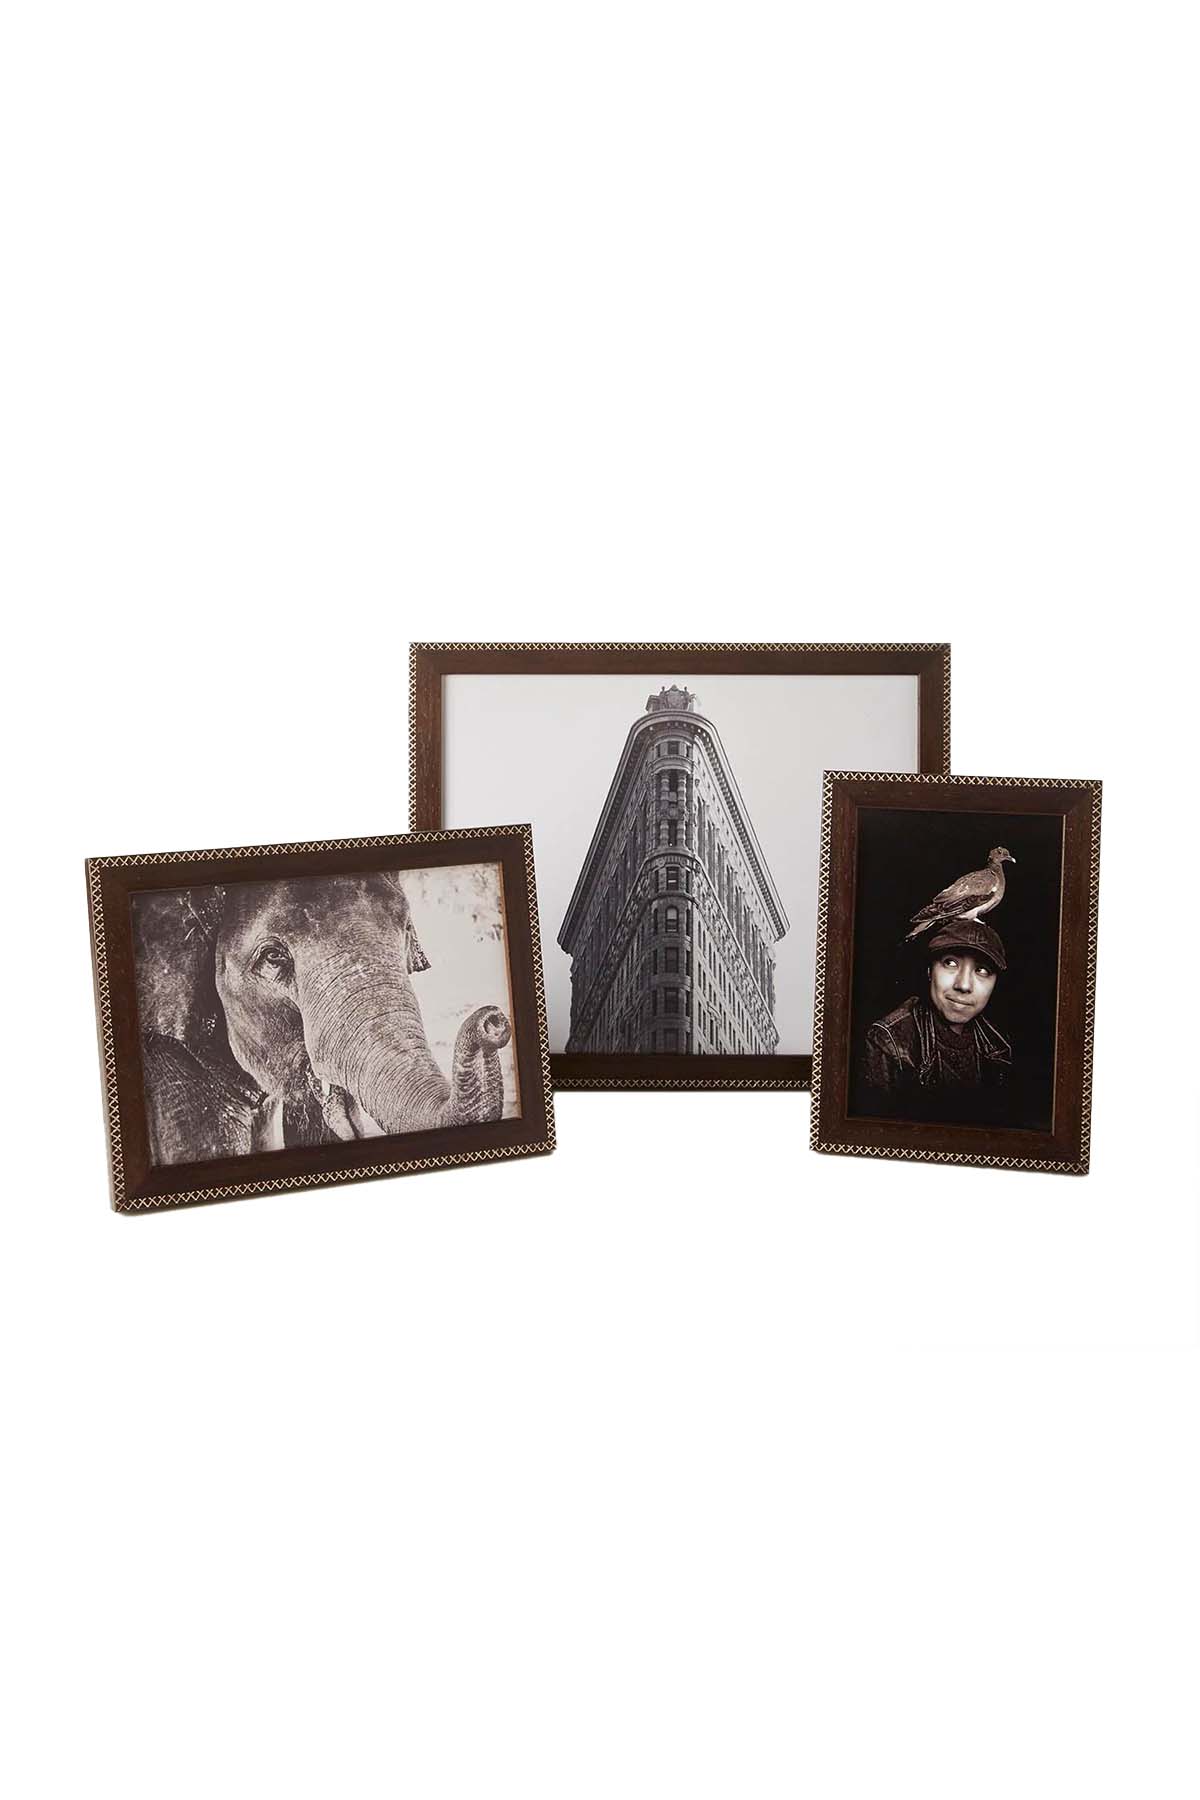 Grouping of Jax Brown frames of different sizes with Gold criss-cross detailing